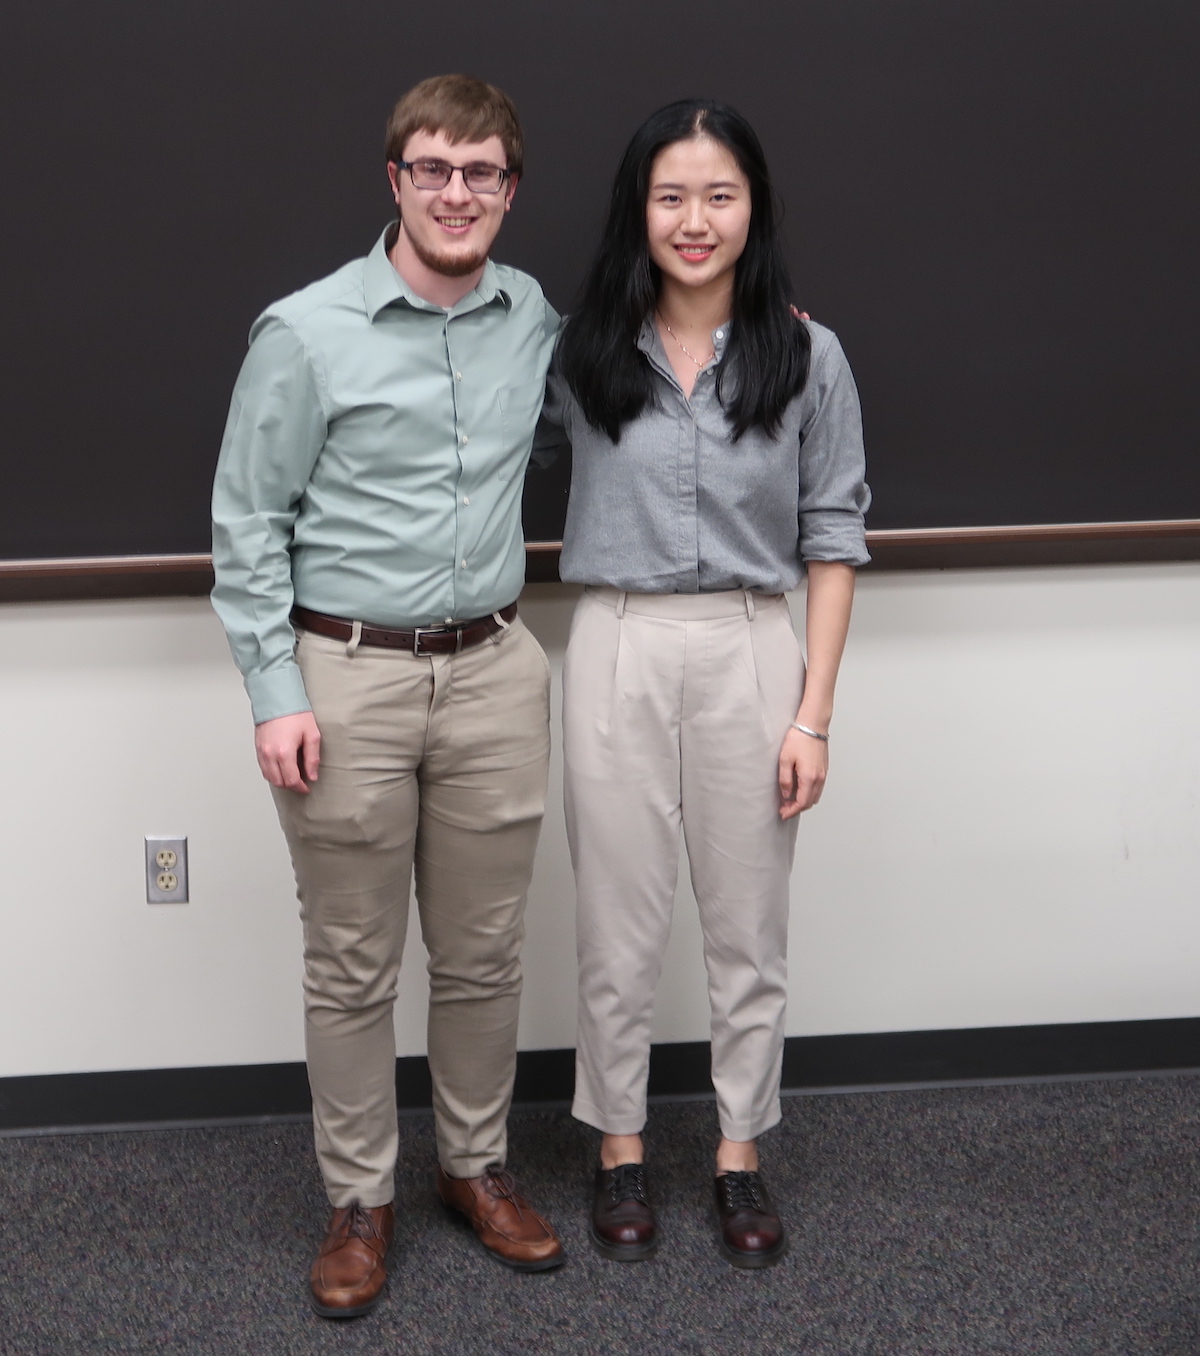 Hedanqui Bai and Matthew Brown after presenting at the Department of Atmospheric Sciences Seminar, held February 13.